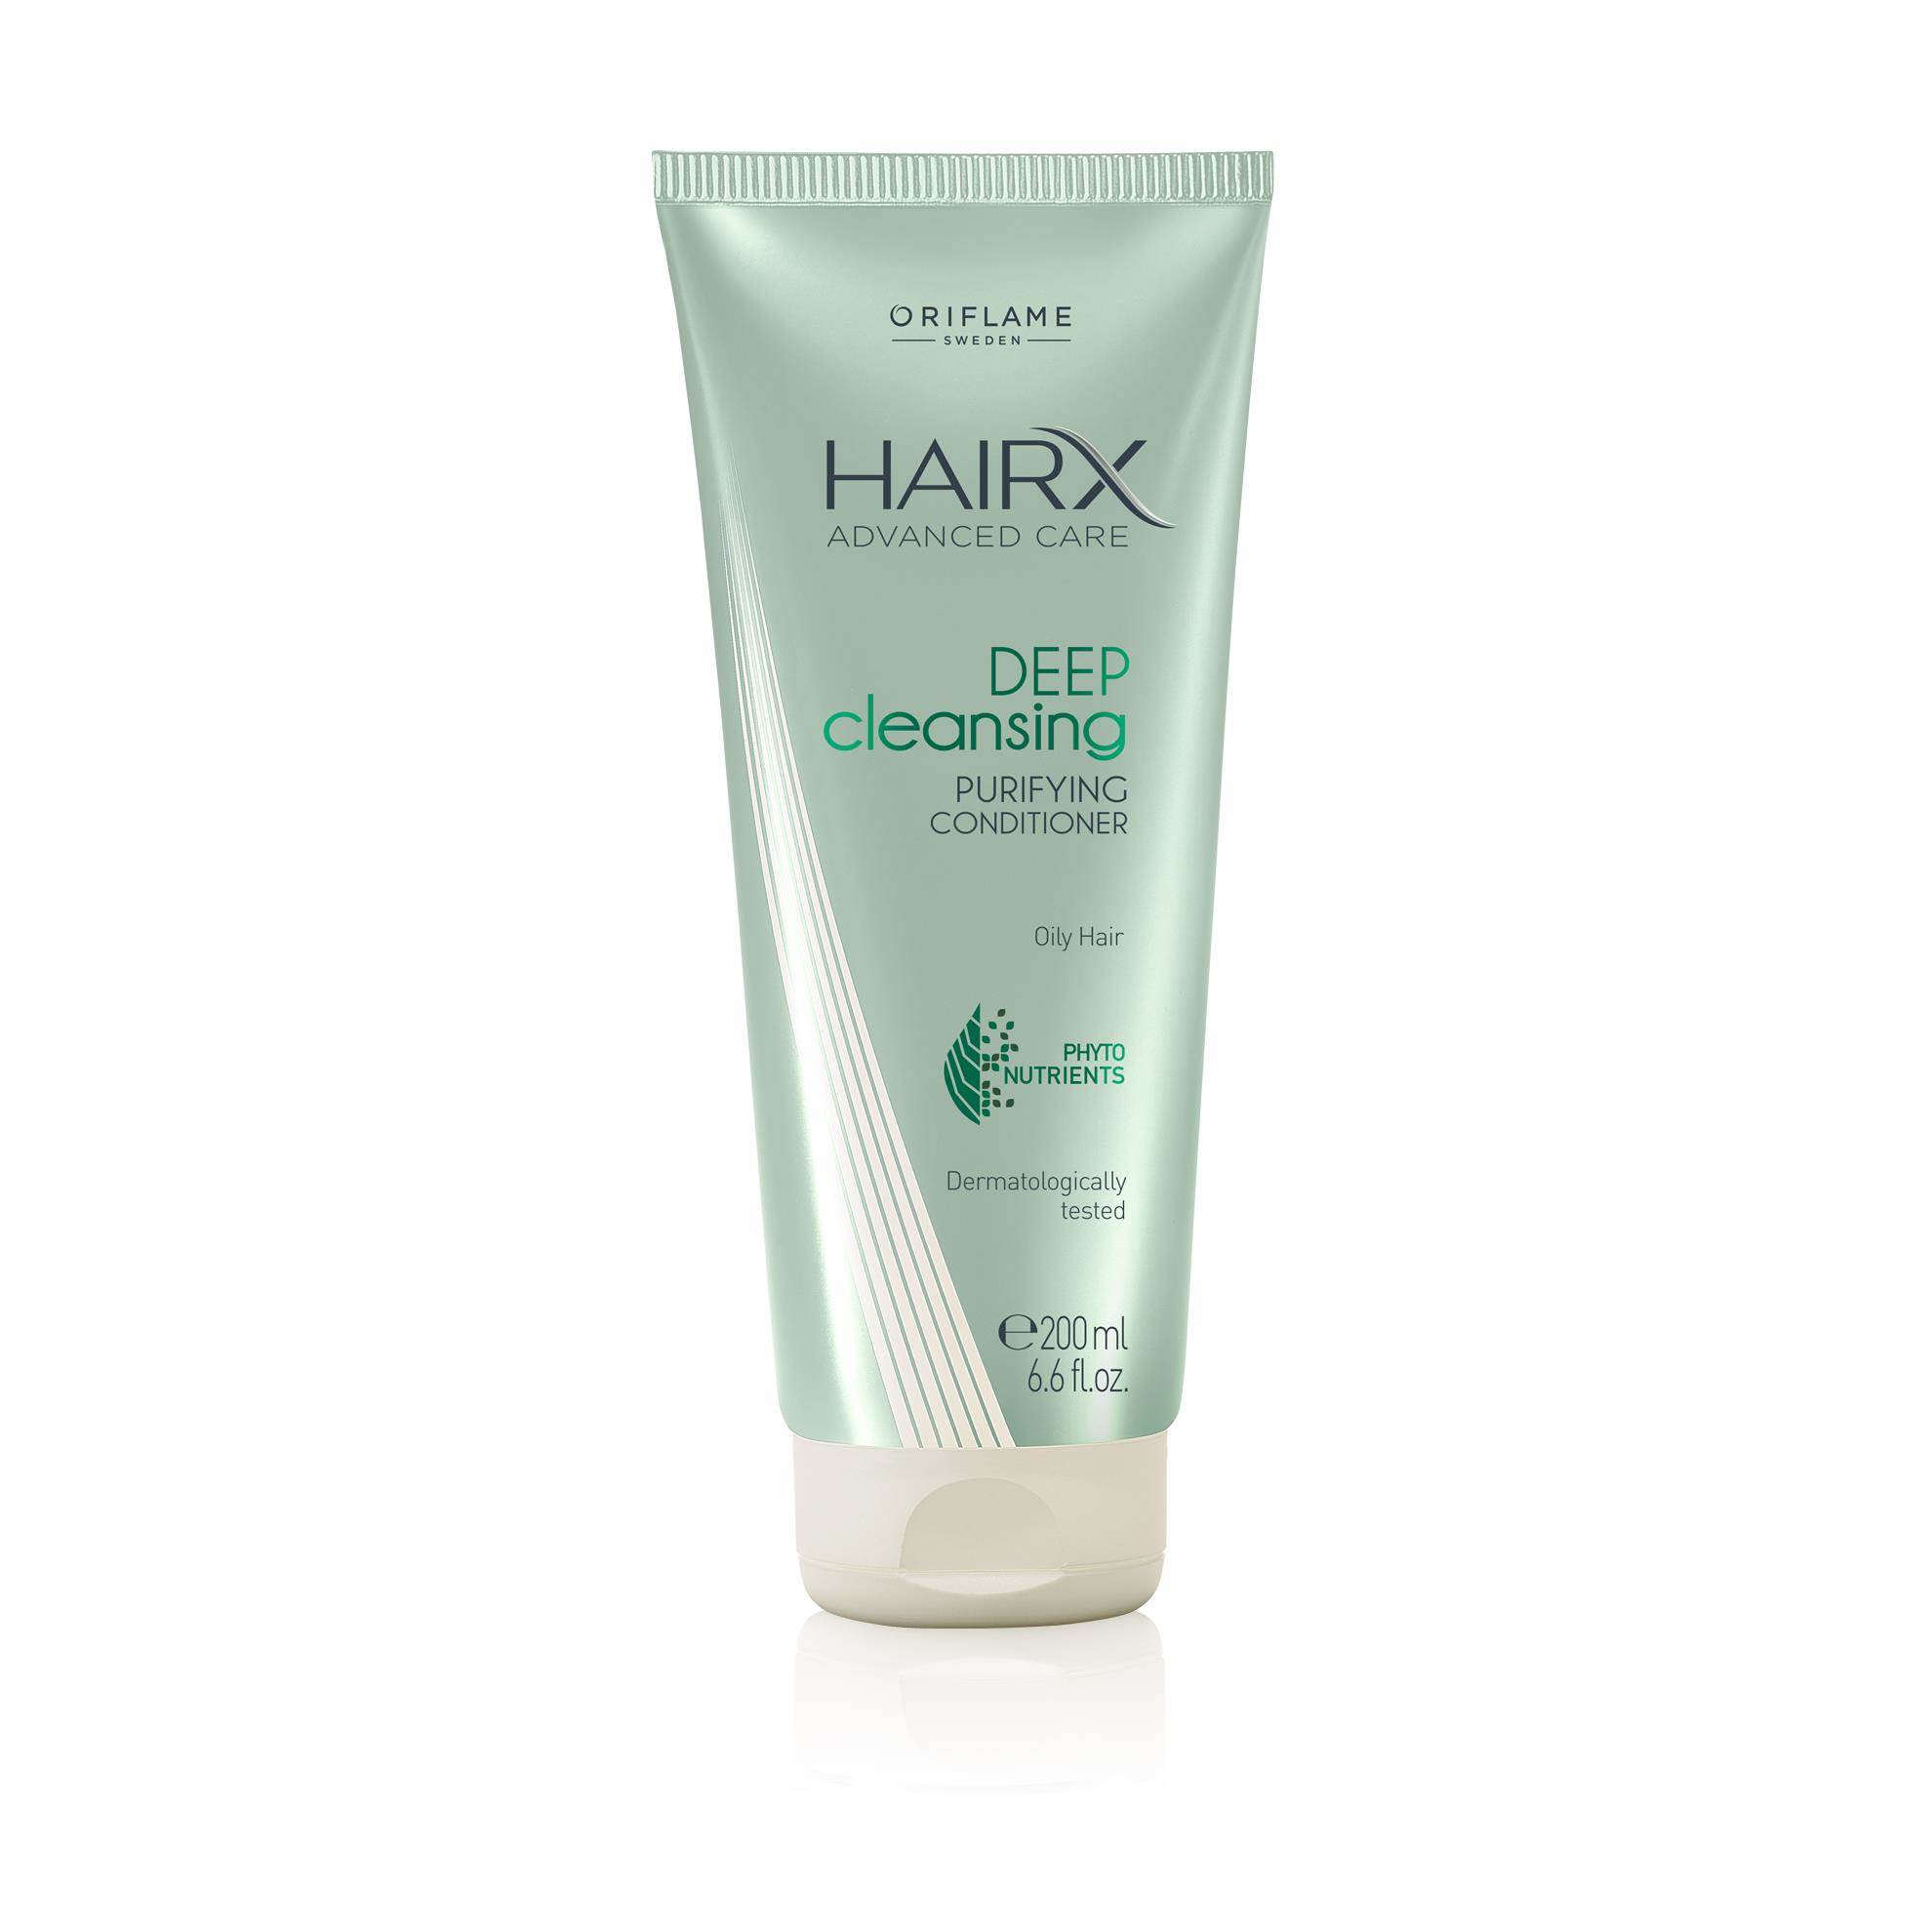 hairx-advanced-care-deep-cleansing-purifying-conditioner